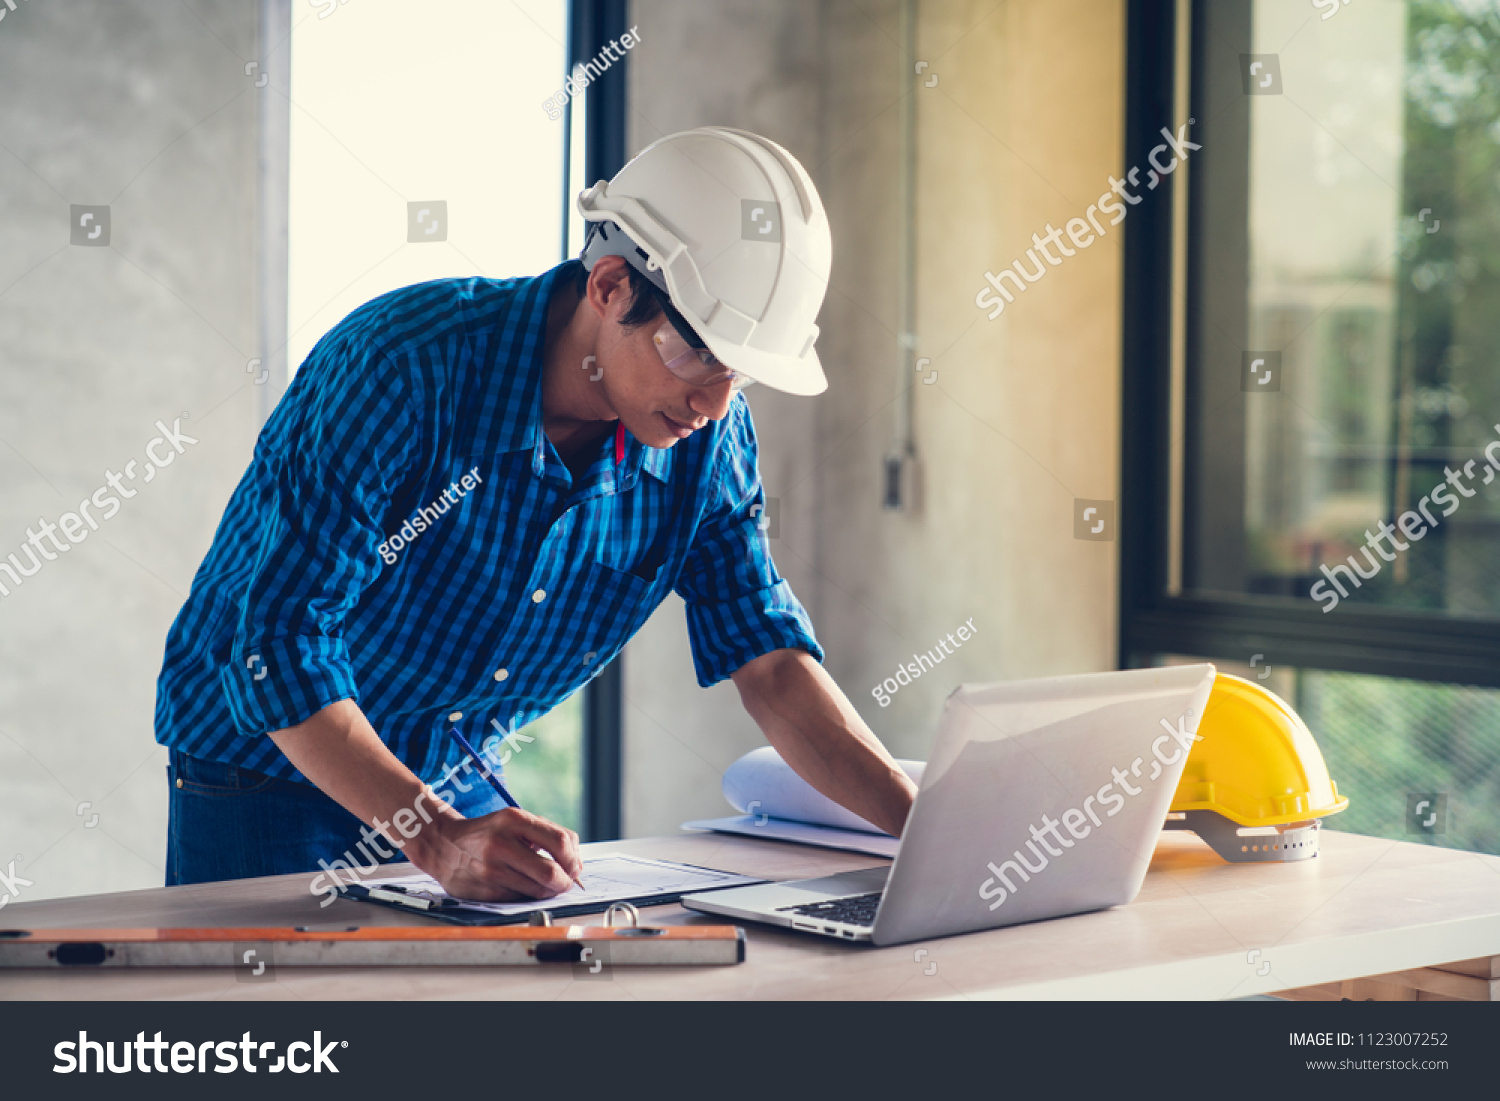 A young man wearing a hard hat preparing Working Documents on a table. 